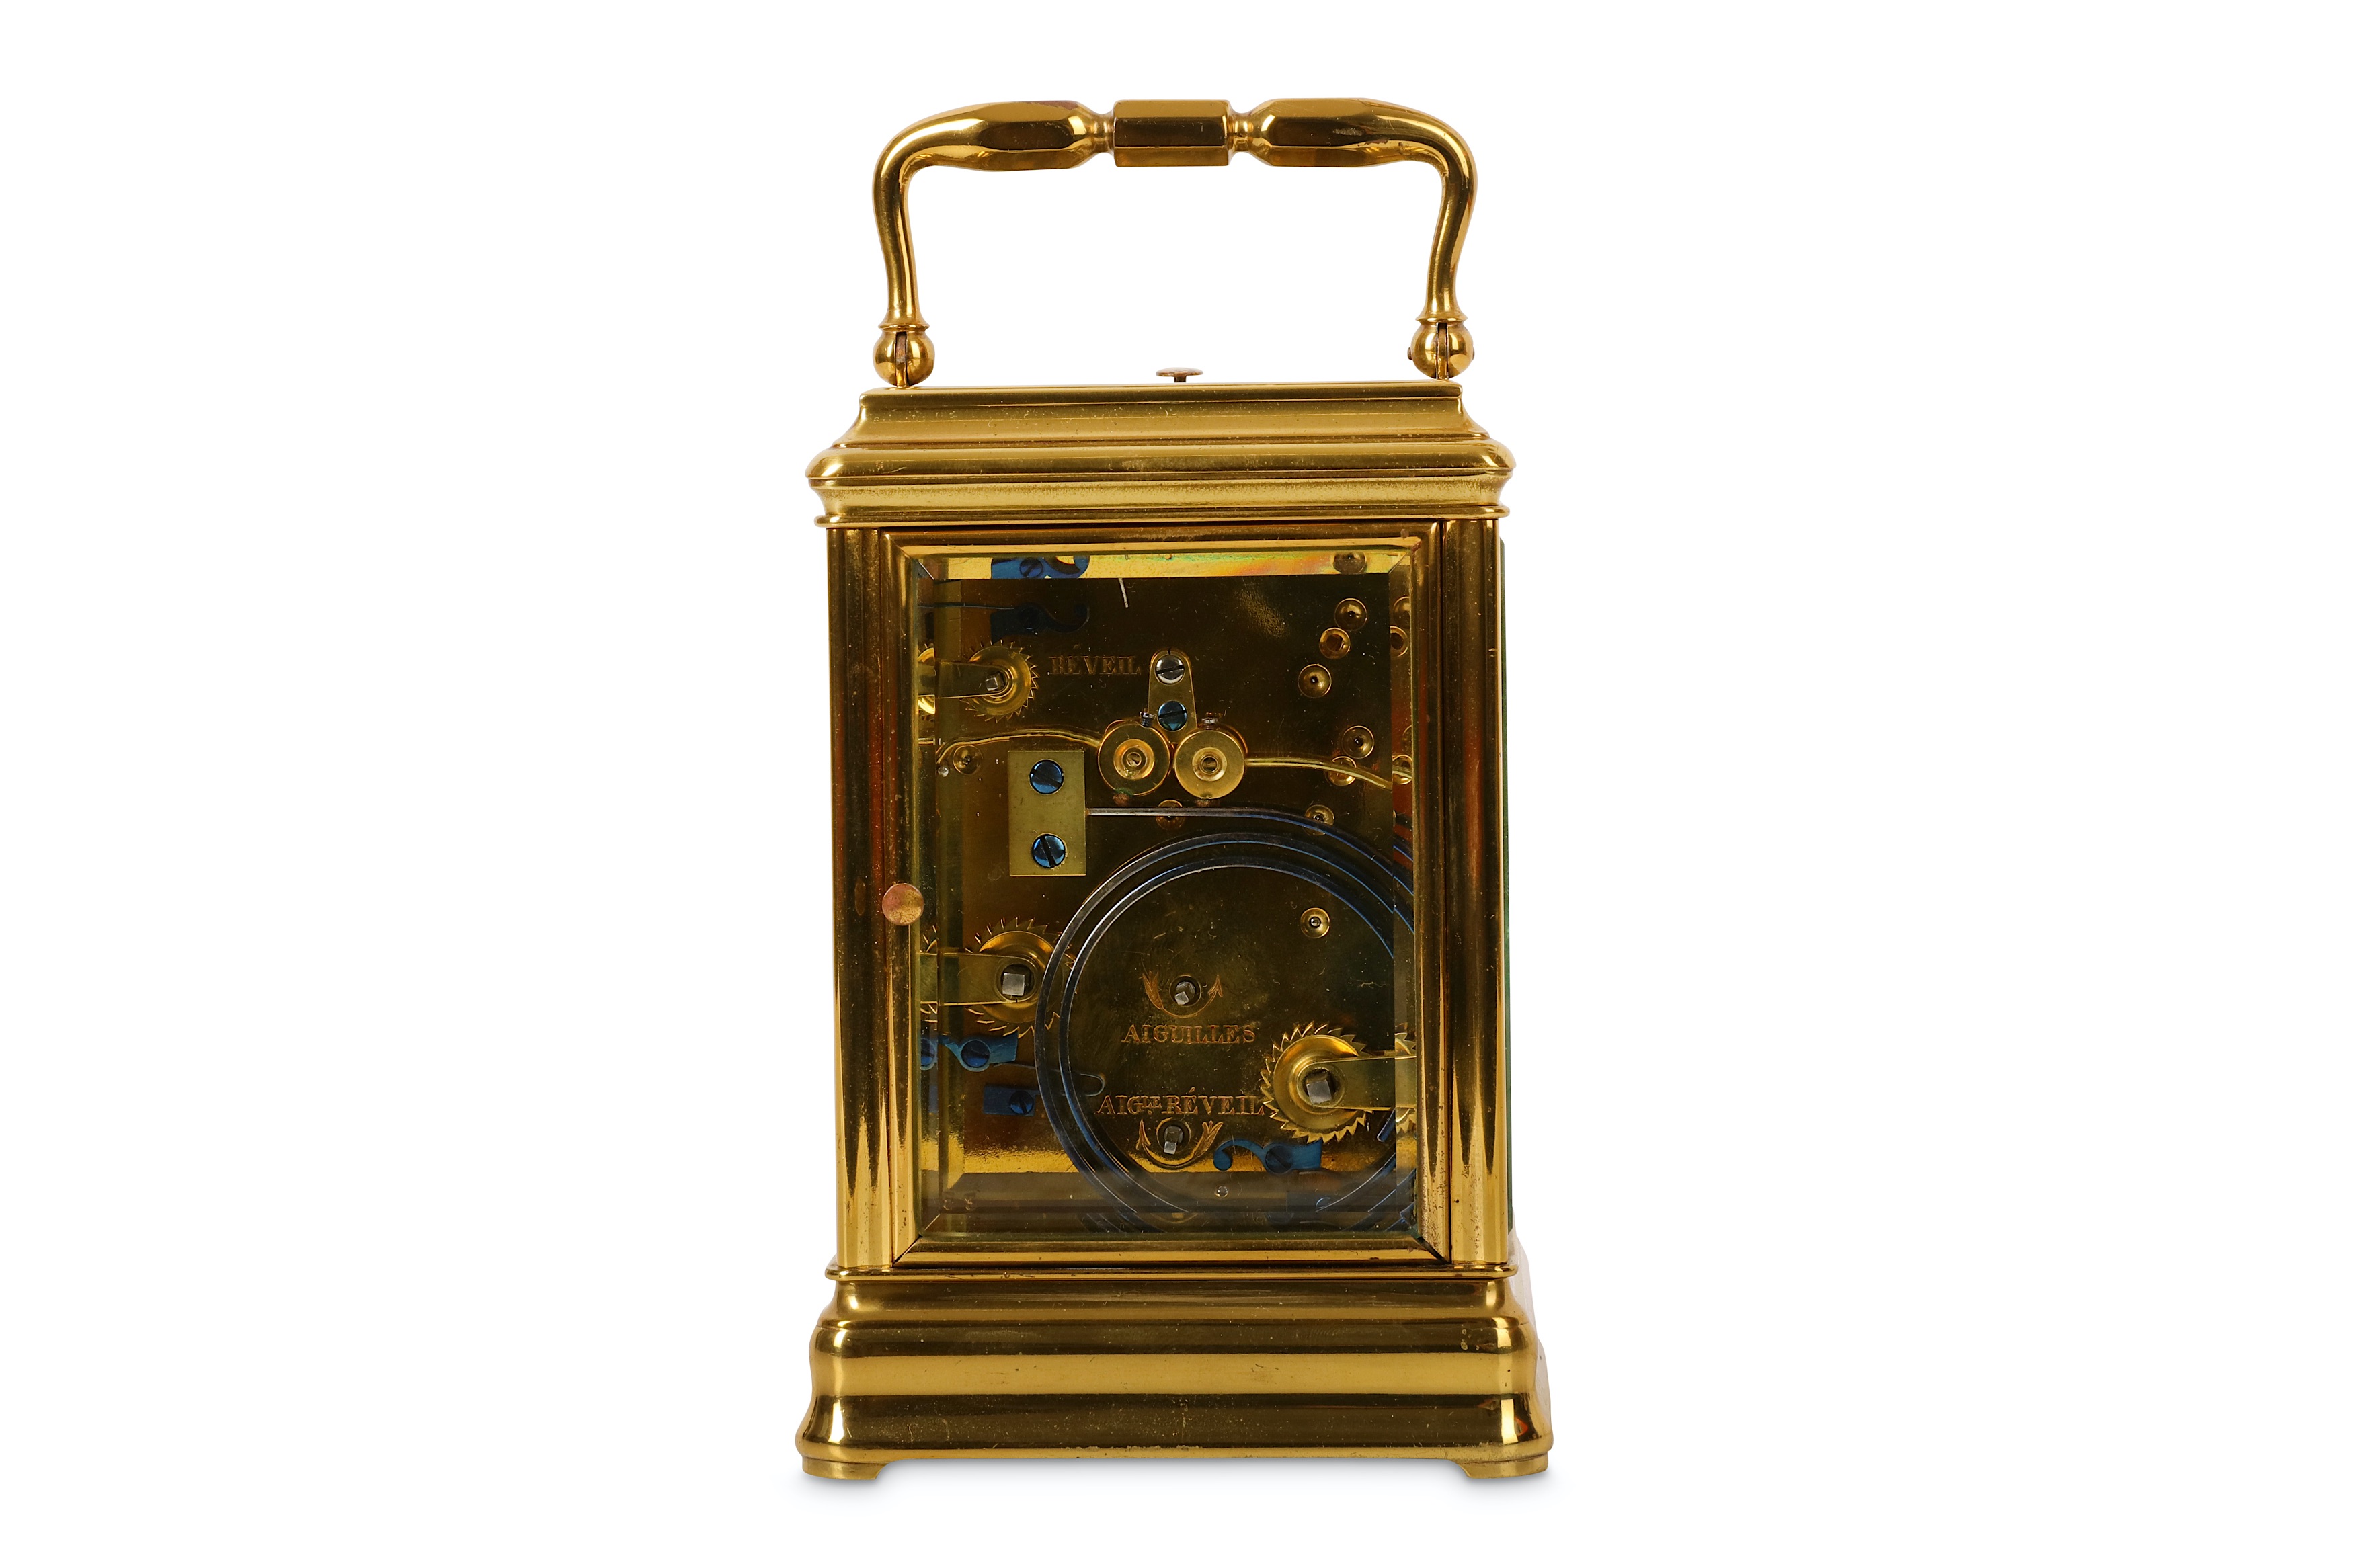 A LATE 19TH CENTURY FRENCH LACQUERED BRASS CARRIAGE CLOCK WITH ALARM AND REPEAT  the gorge case with - Image 3 of 5